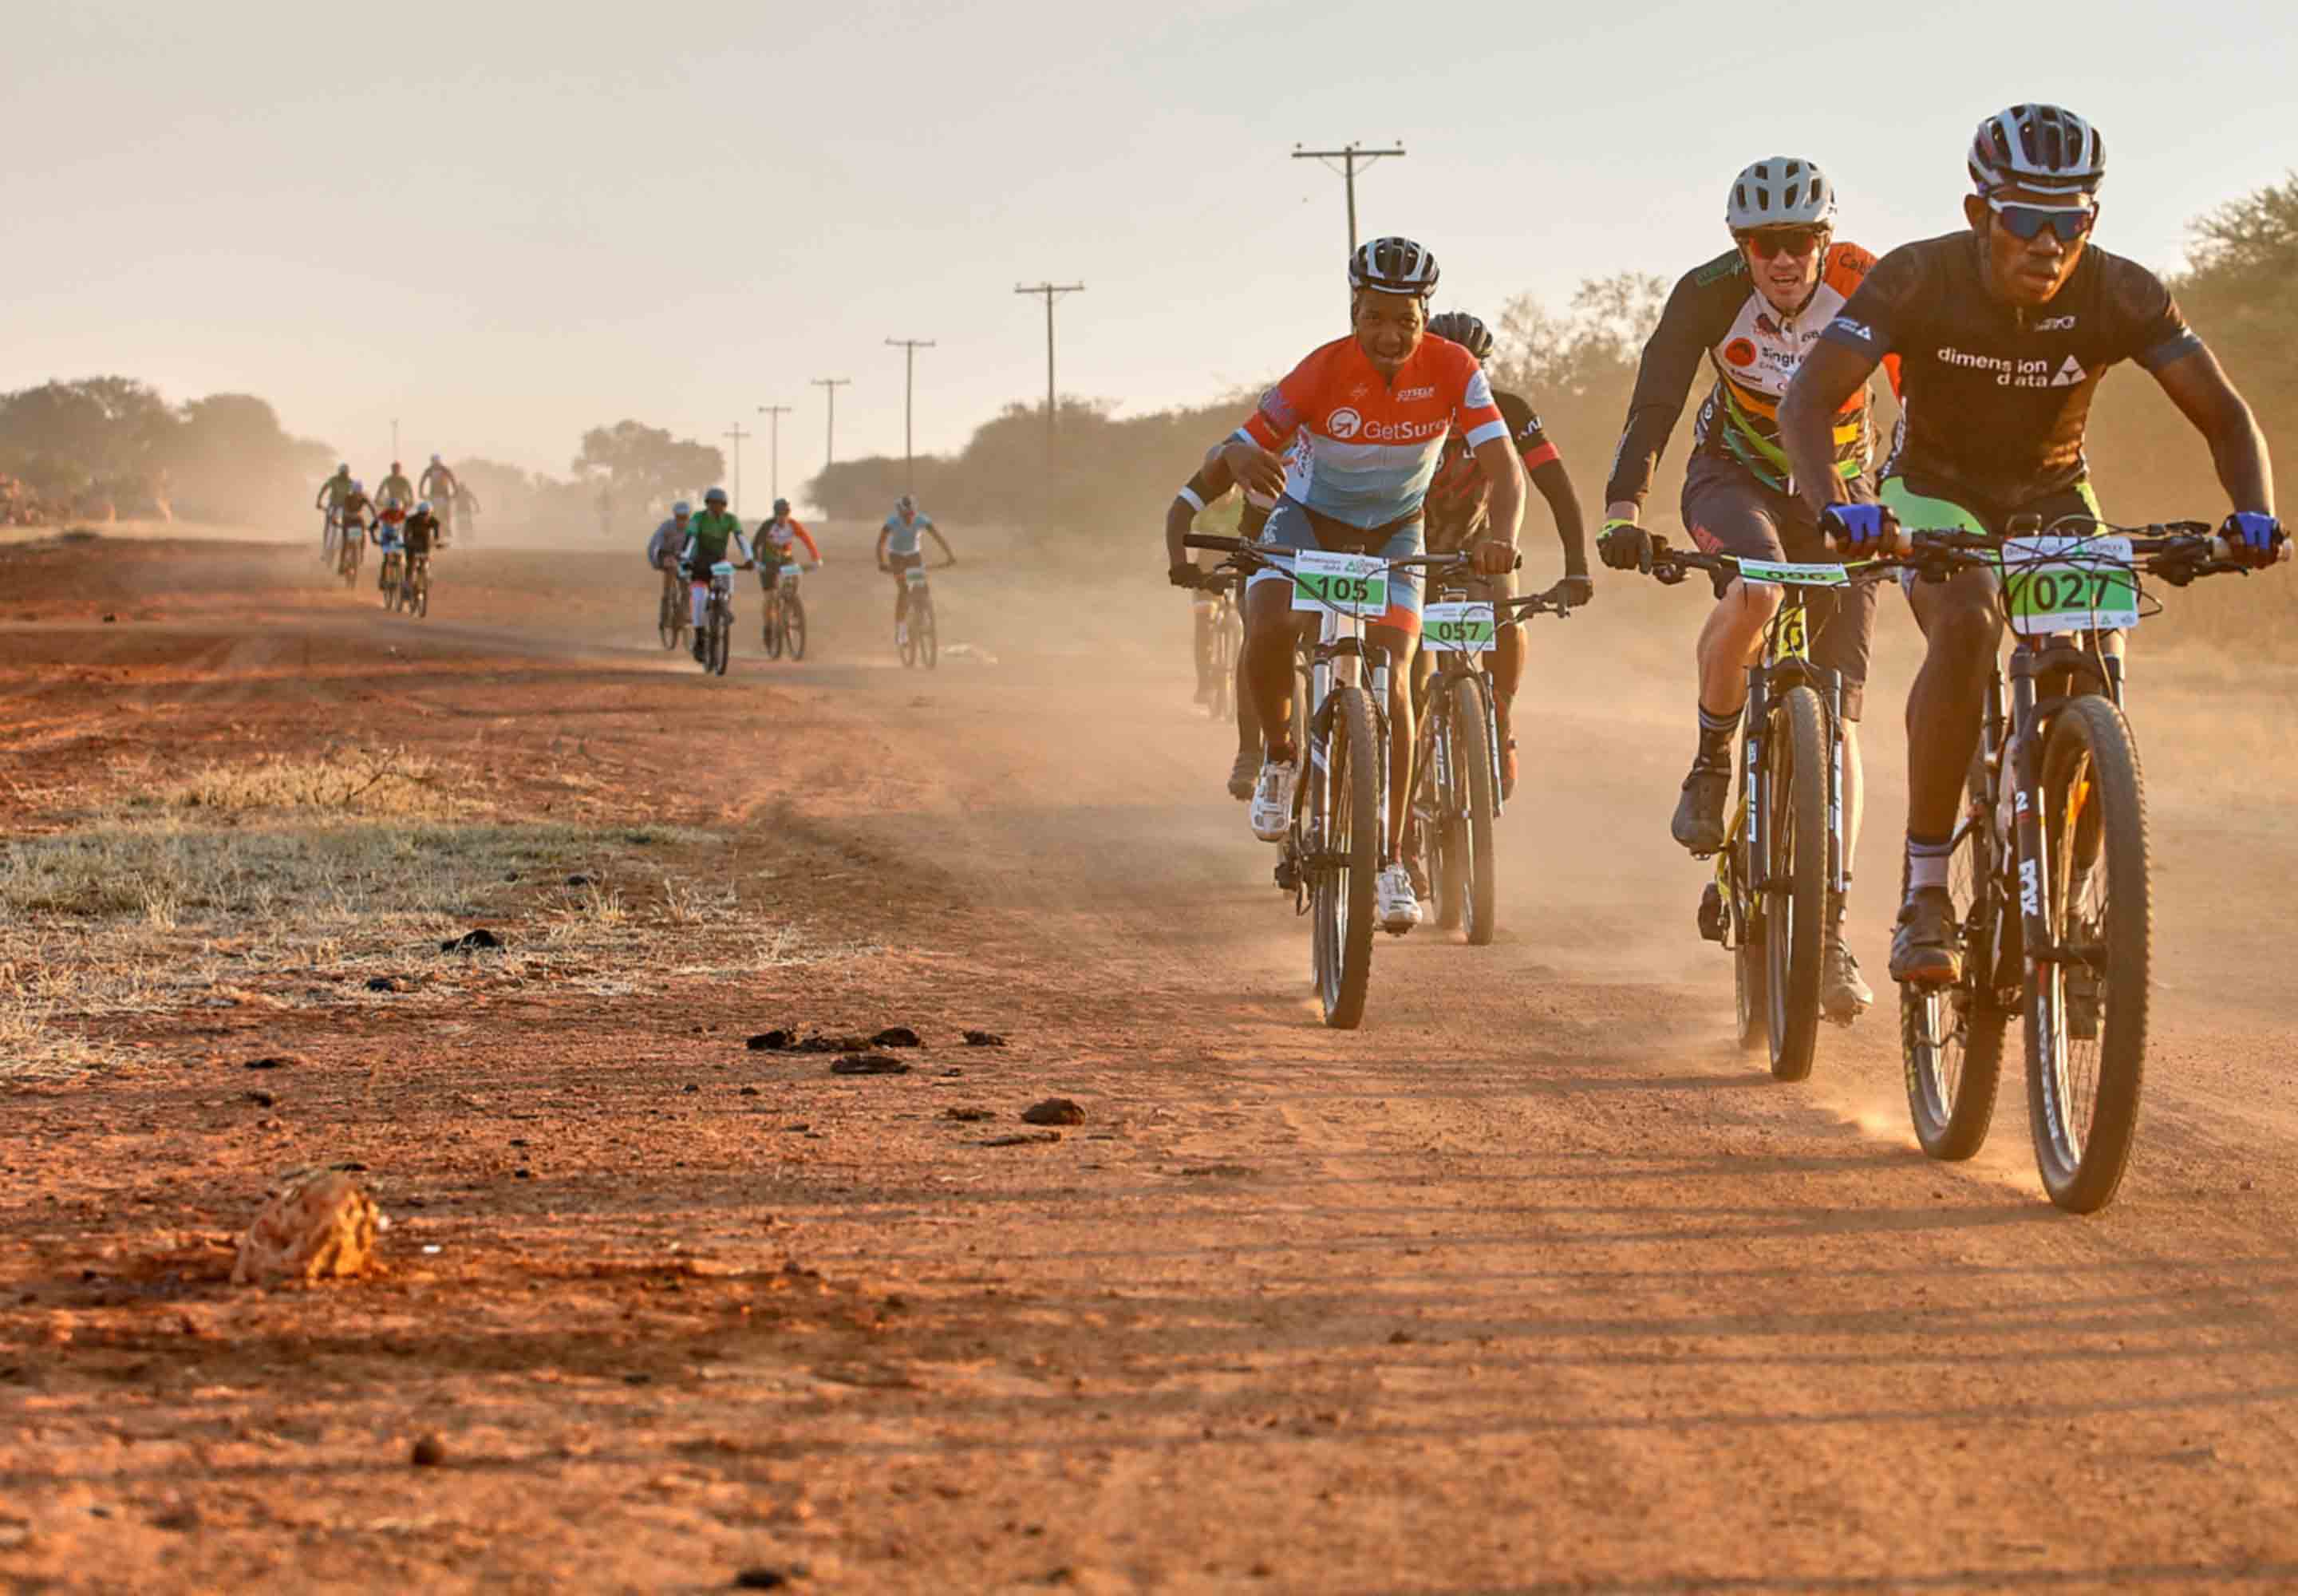 This year, 13 August marks the sixth edition of the Route 73 MTB challenge 